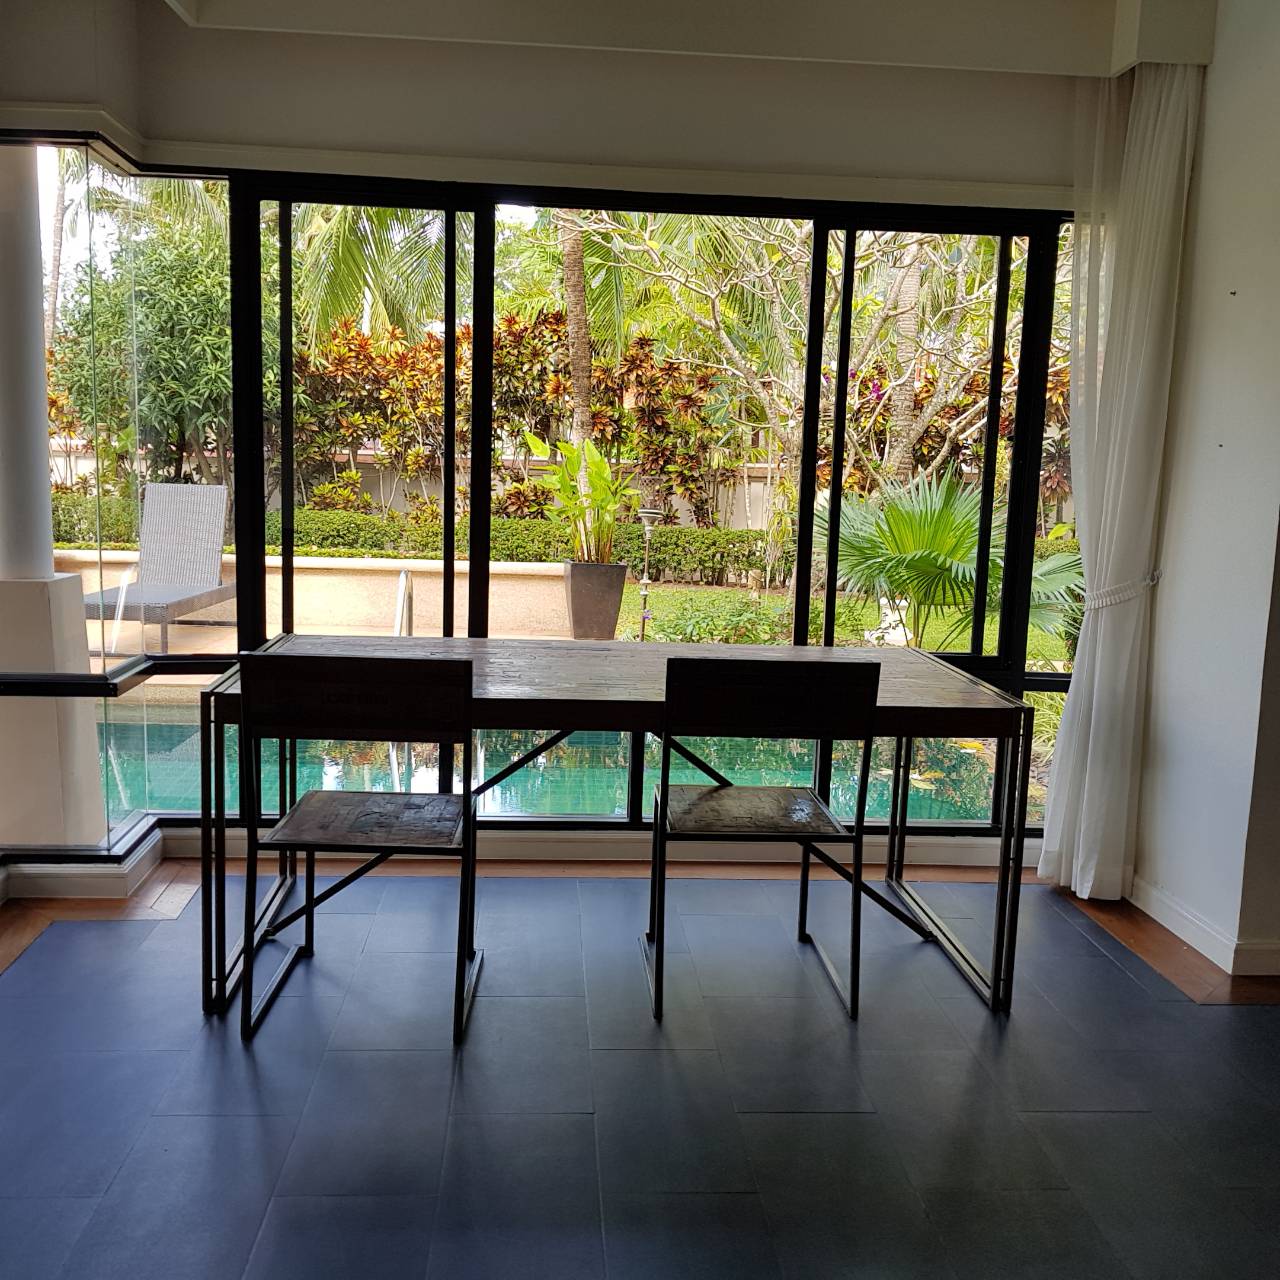 "phuket townhouse for sale"